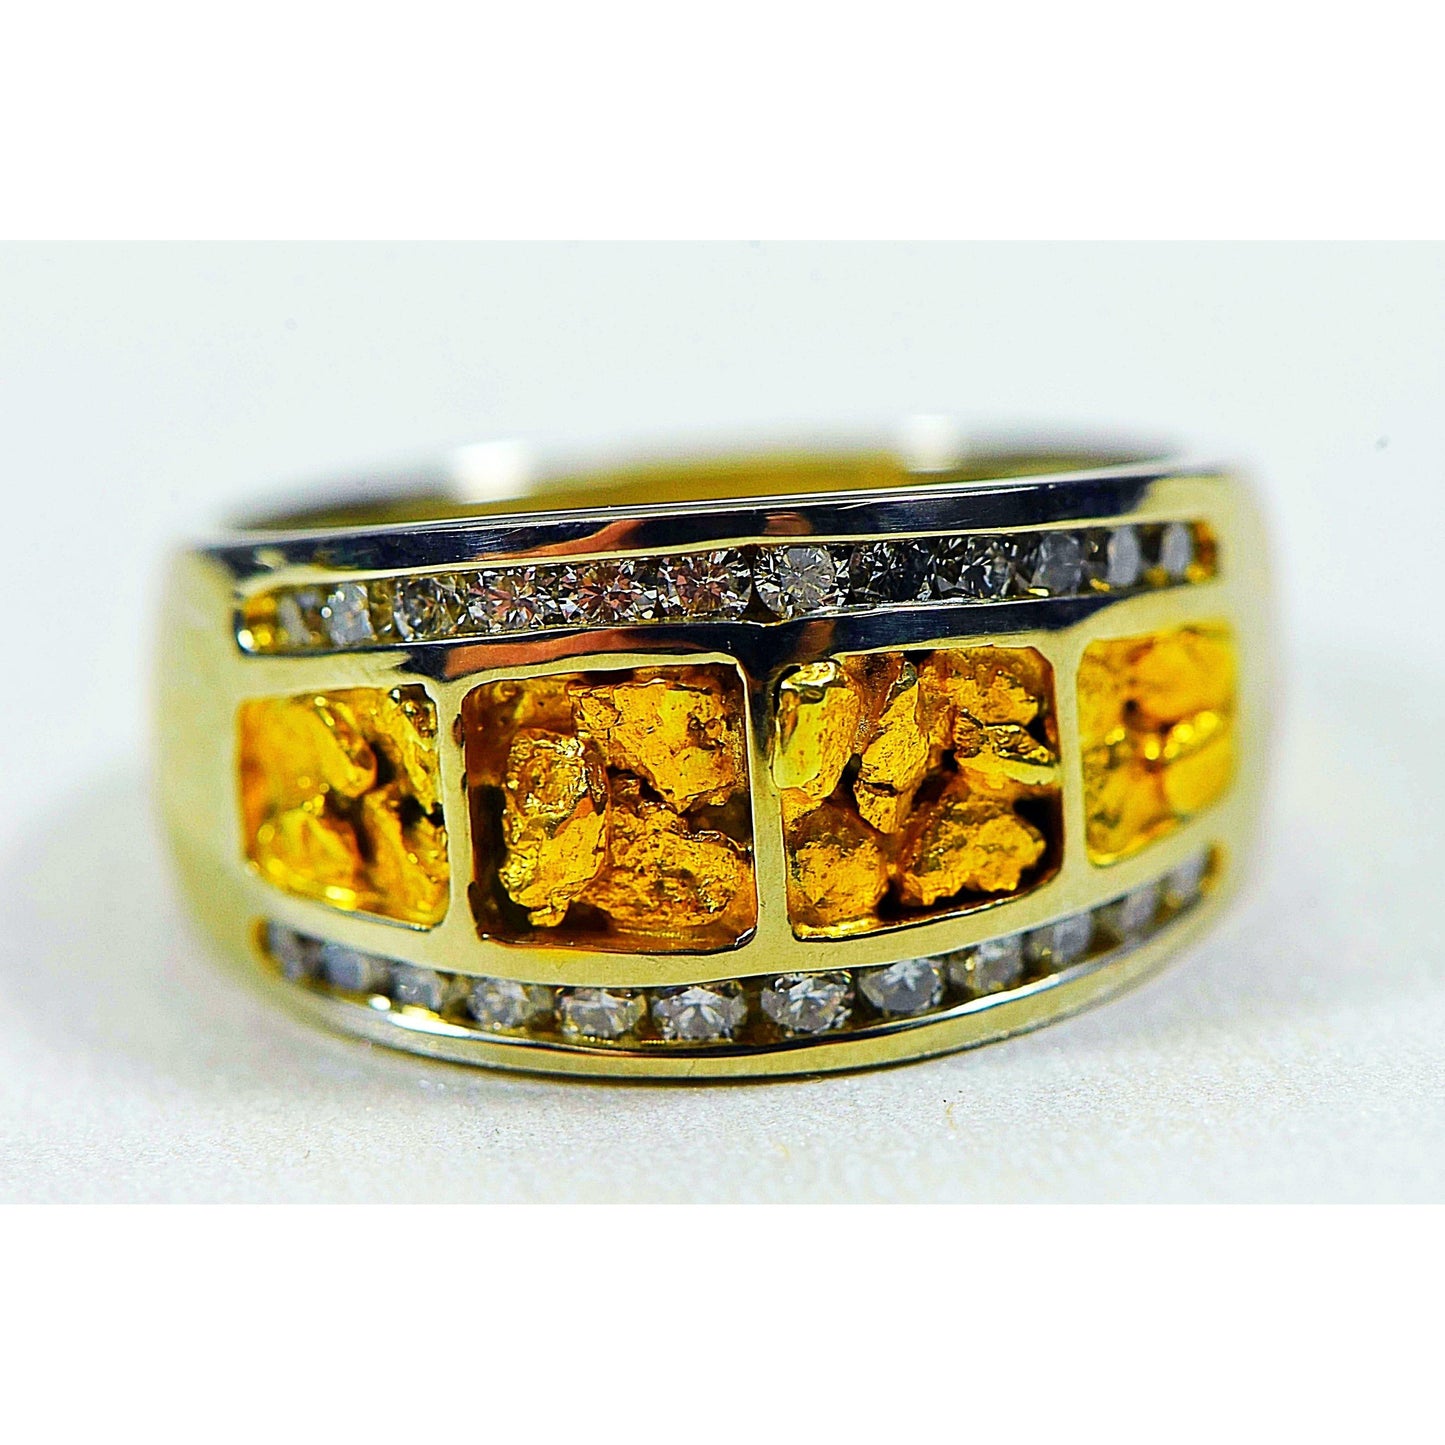 Orocal Gold Nugget Ladies Ring with Diamonds - RL1075DNW-Destination Gold Detectors